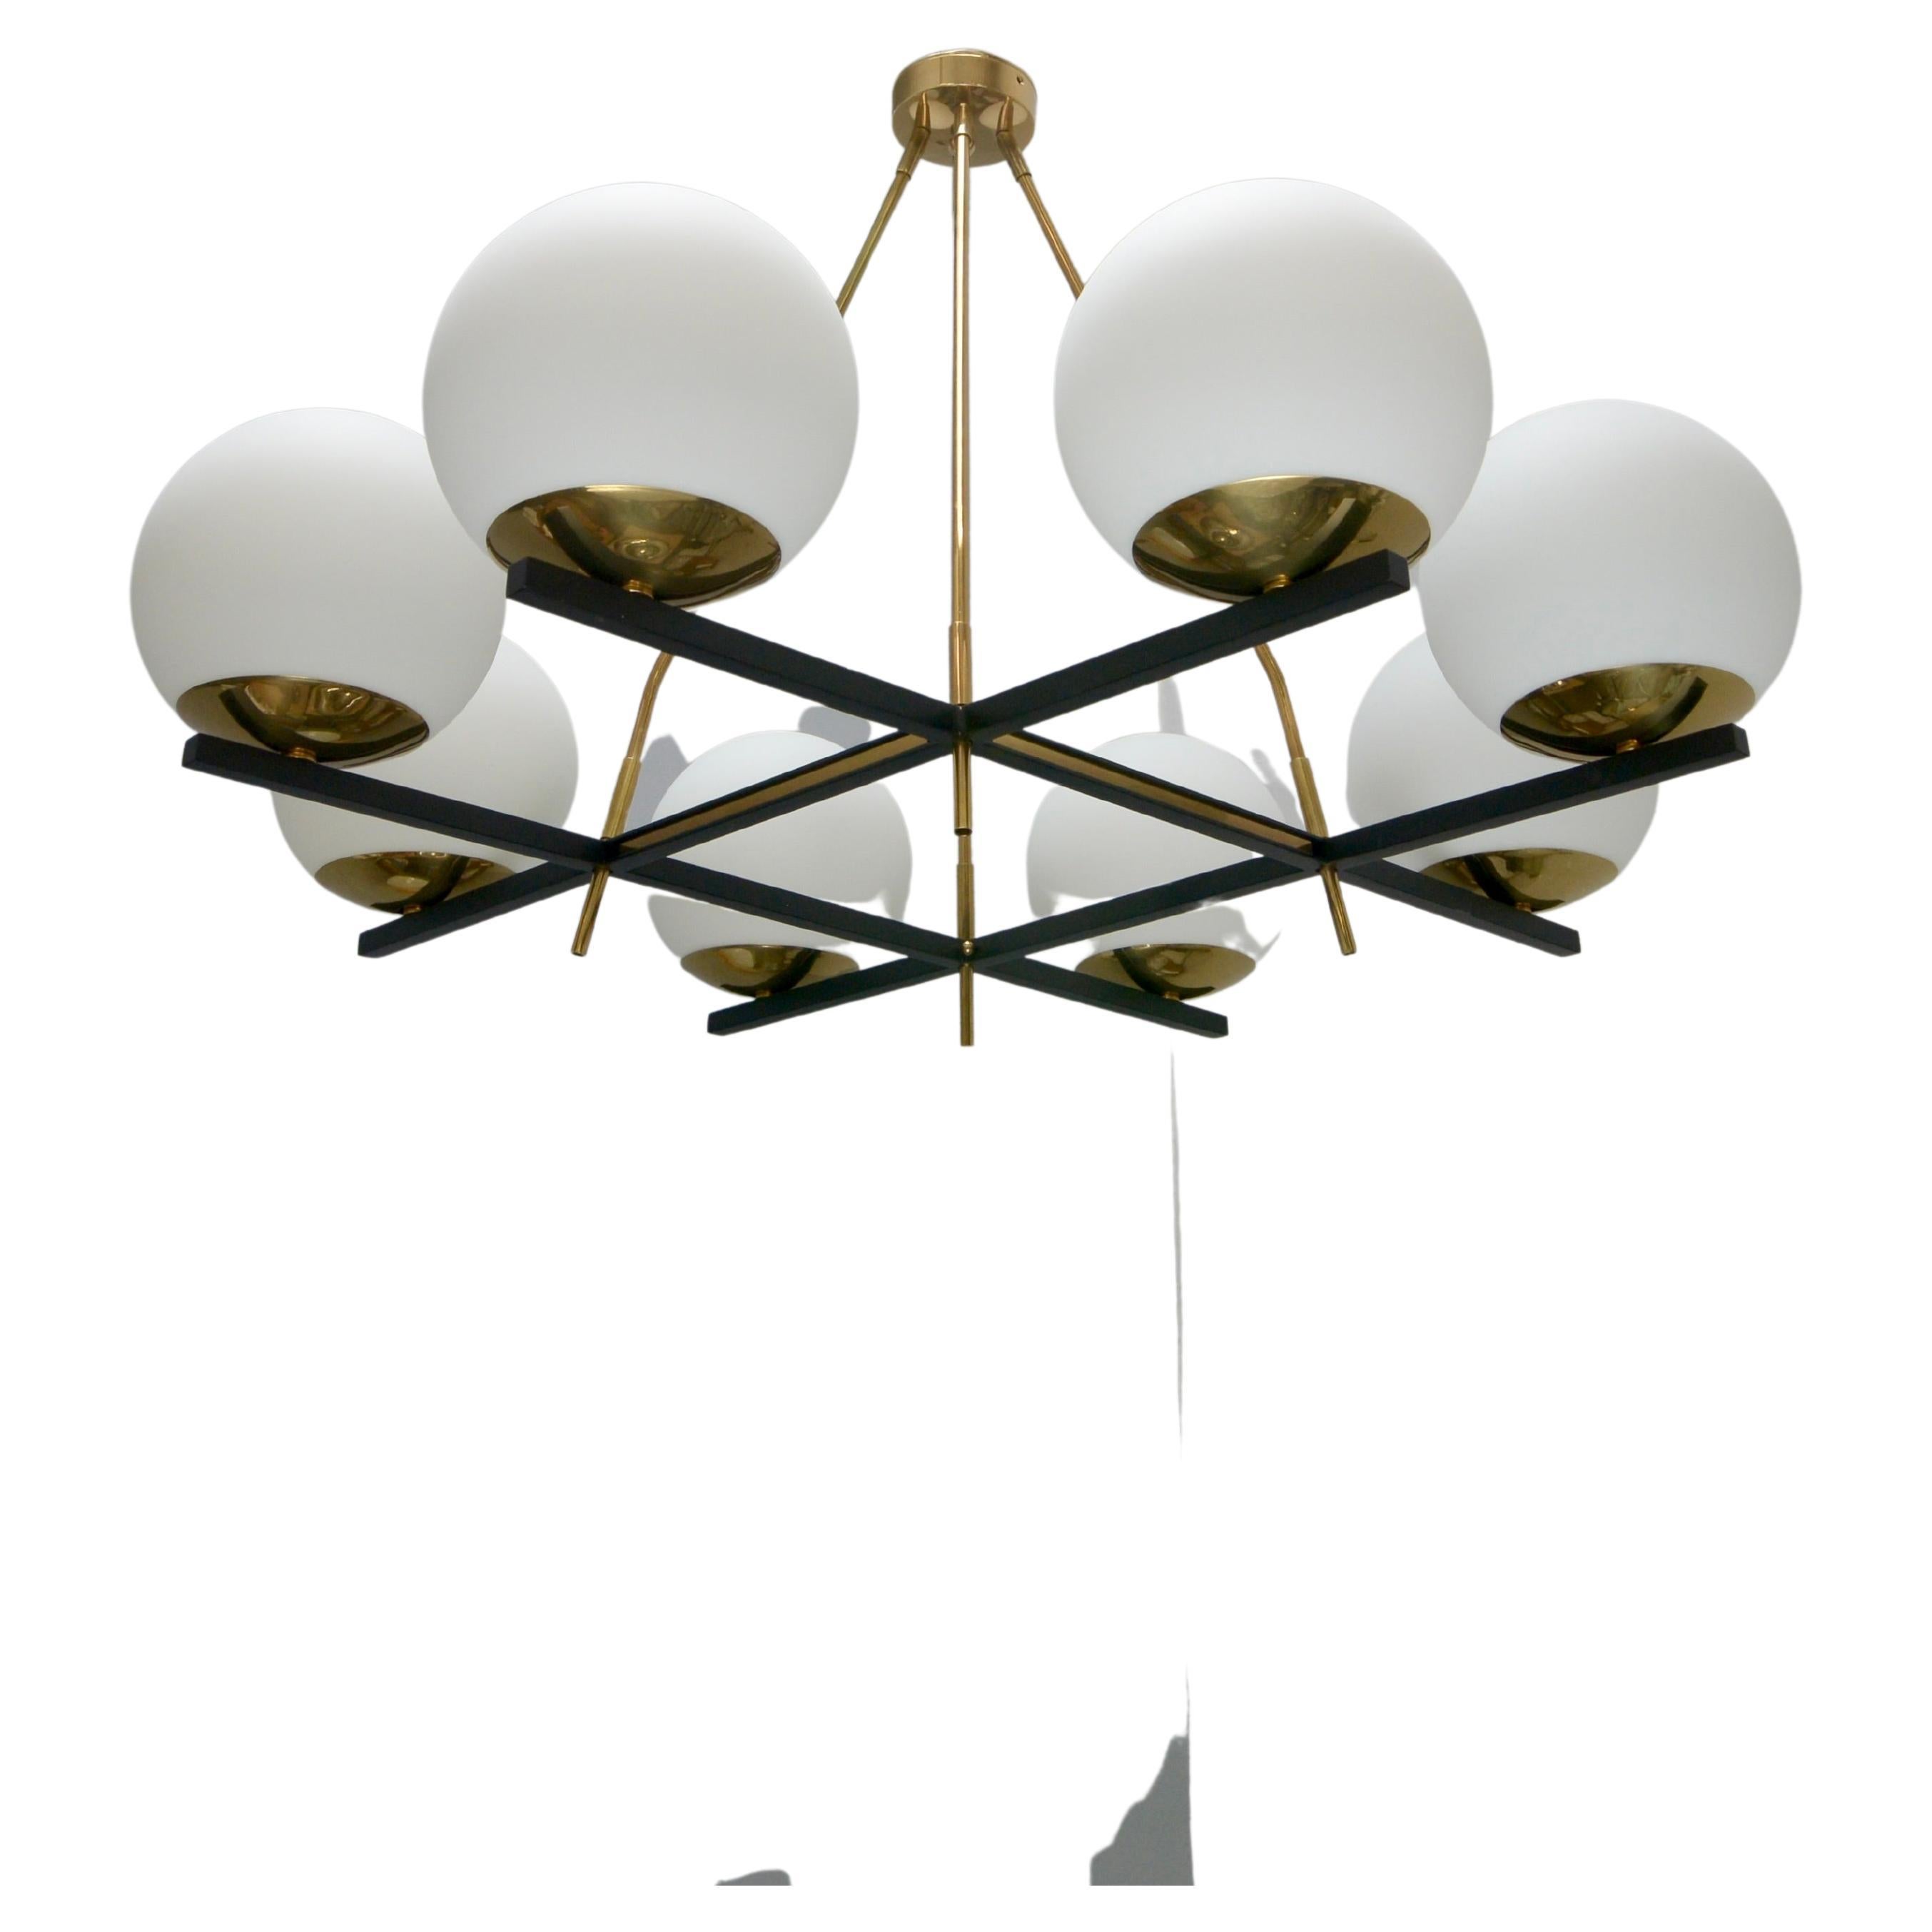 Stunning LUglo flush mount chandelier, an 8 globe glass shade flush mount/chandelier inspired by classical mid century Italian design. Made in glass, steel, aluminum and aged brass. Featuring an elegant grid pattern, this fixture is wired with 1-E12